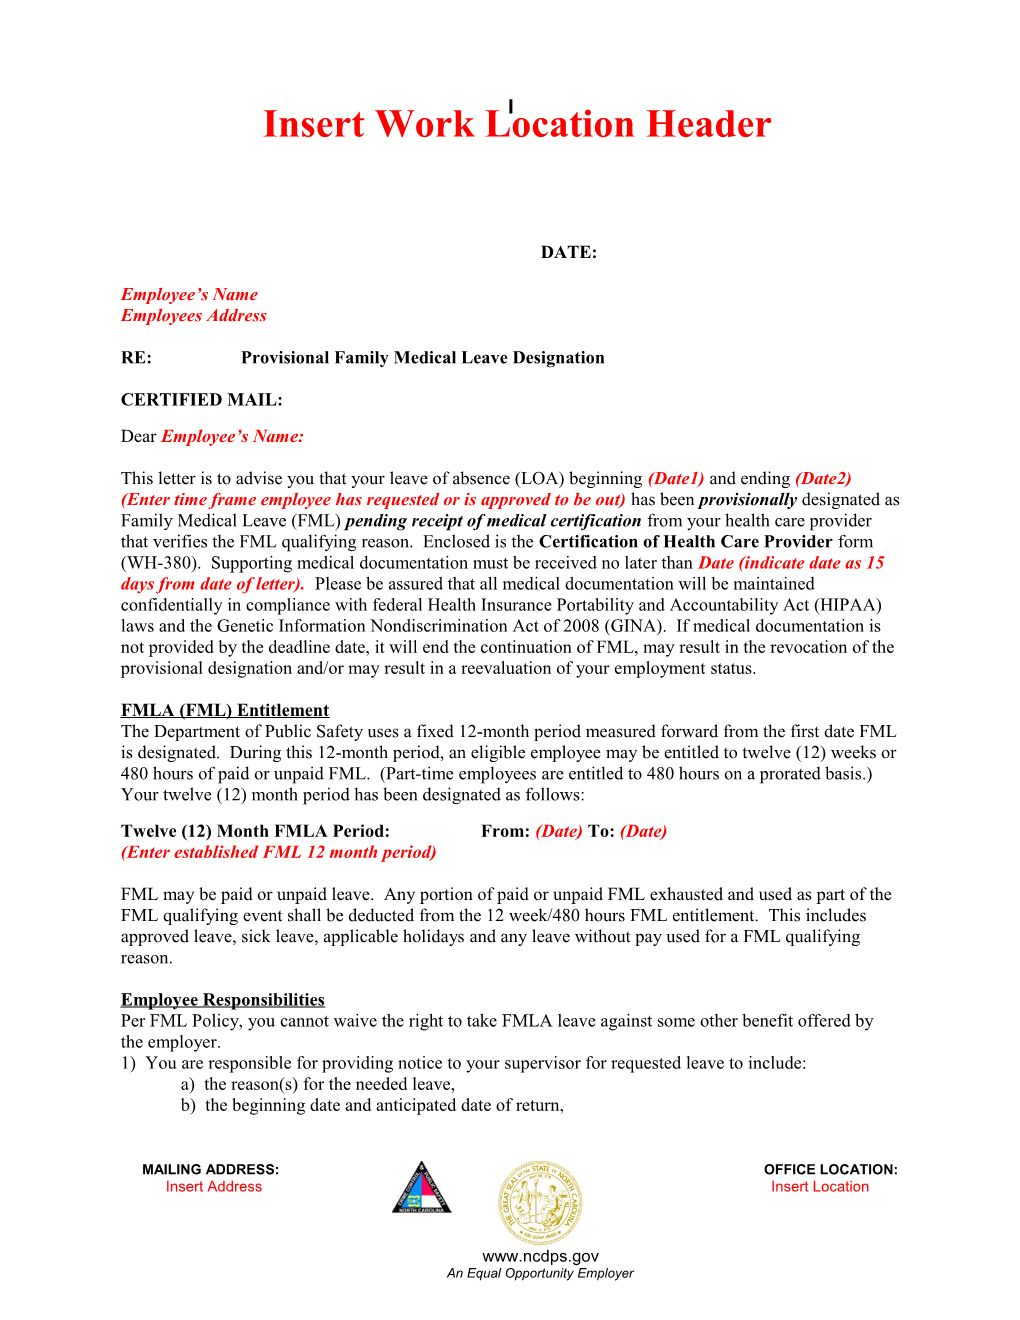 RE: Provisional Family Medical Leave Designation